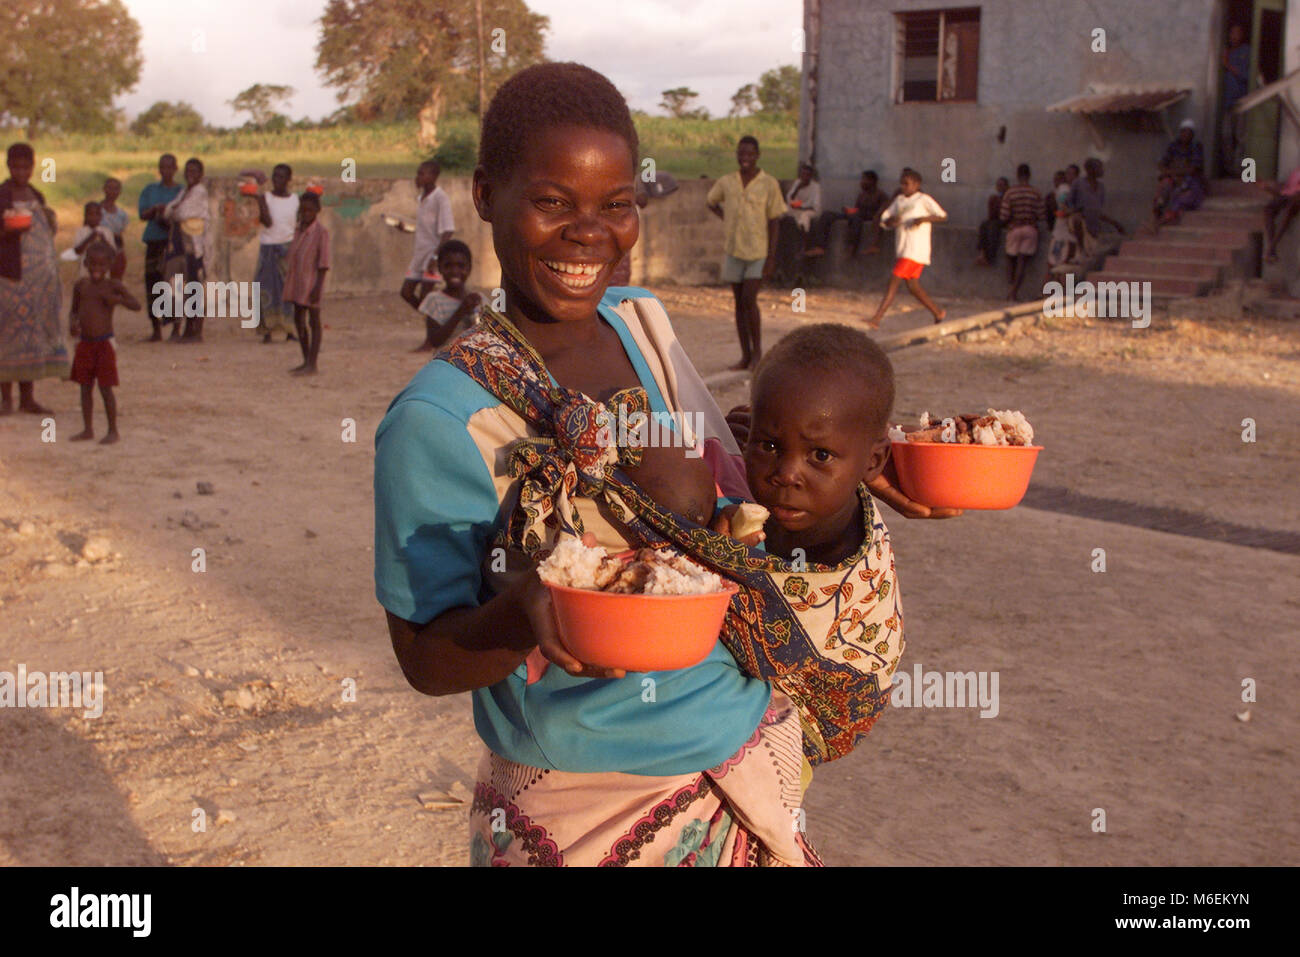 Floods in Mozambique  March 2000; A young mother happy to have received cooked bowls of rice and stew made with relief supplies at Pande camp for flood victims near Save town. Stock Photo